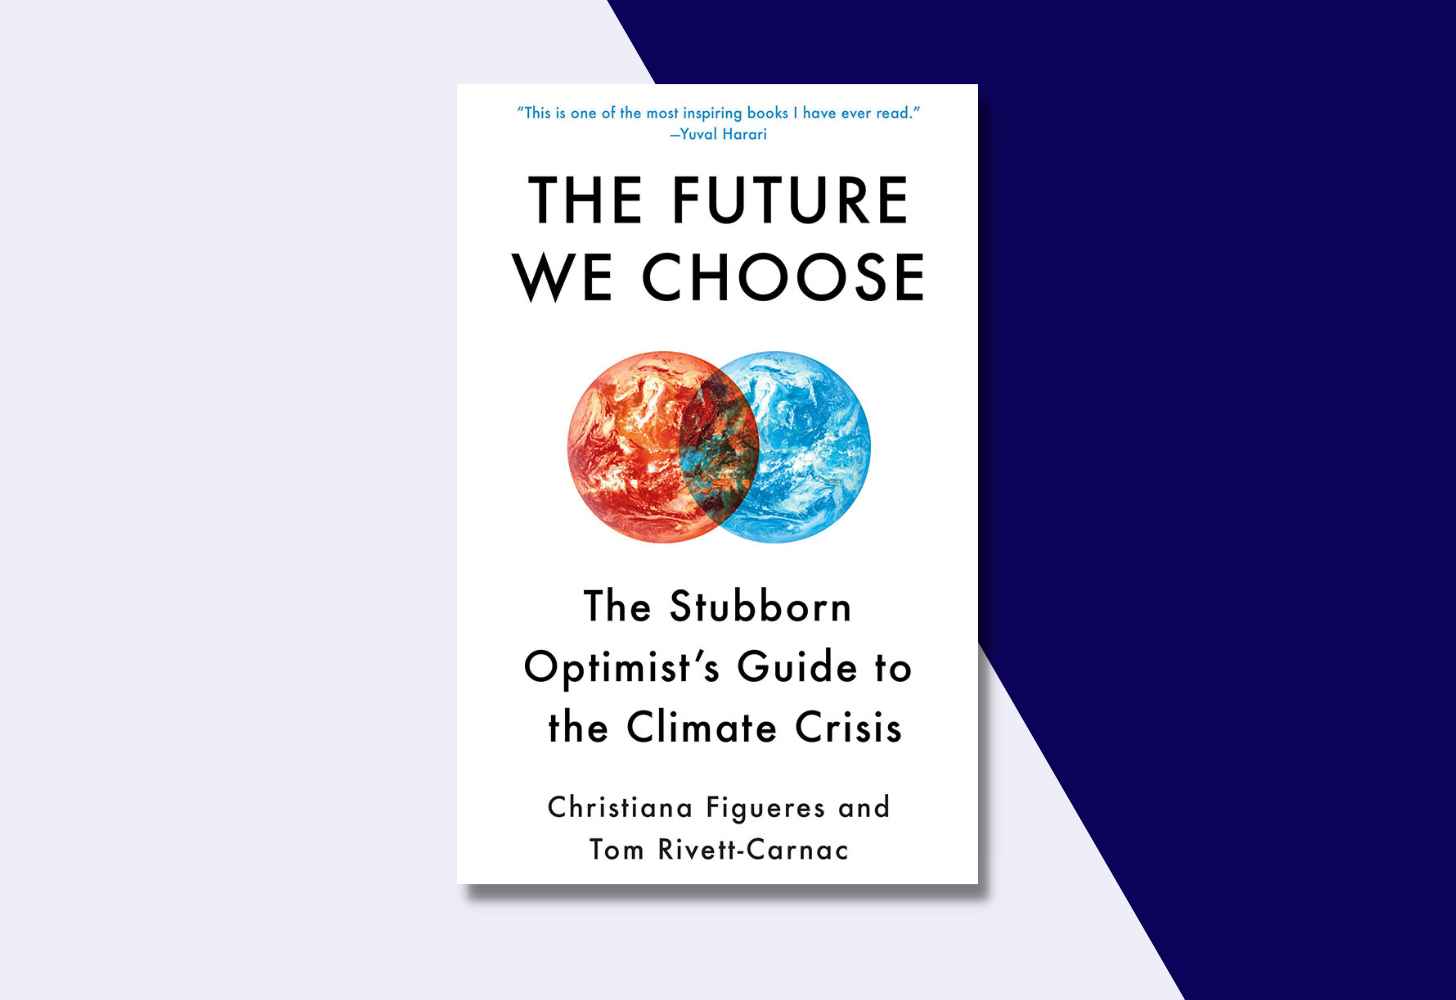 The Cover Of “The Future We Choose: The Stubborn Optimist’s Guide to the Climate Crisis” by Christiana Figueres and Tom Rivett-Carnac